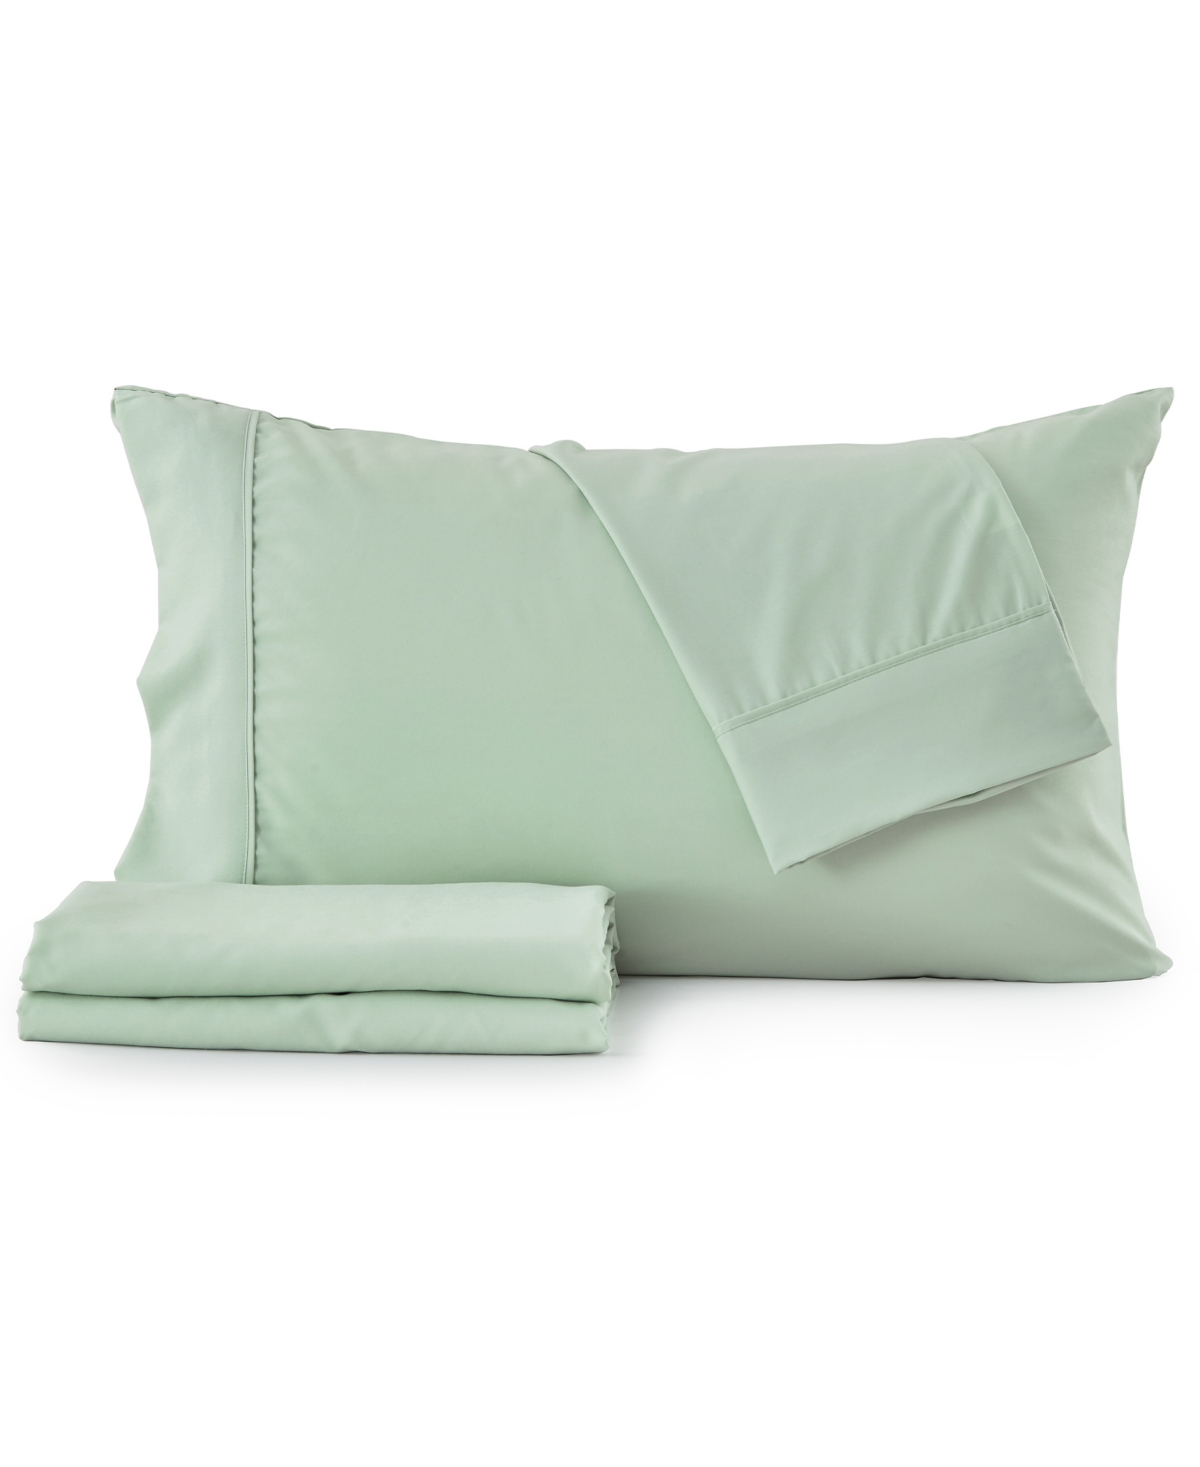 Premium Comforts Rayon From Bamboo Blend Crease-resistant 3 Piece Sheet Set, Twin In Sage